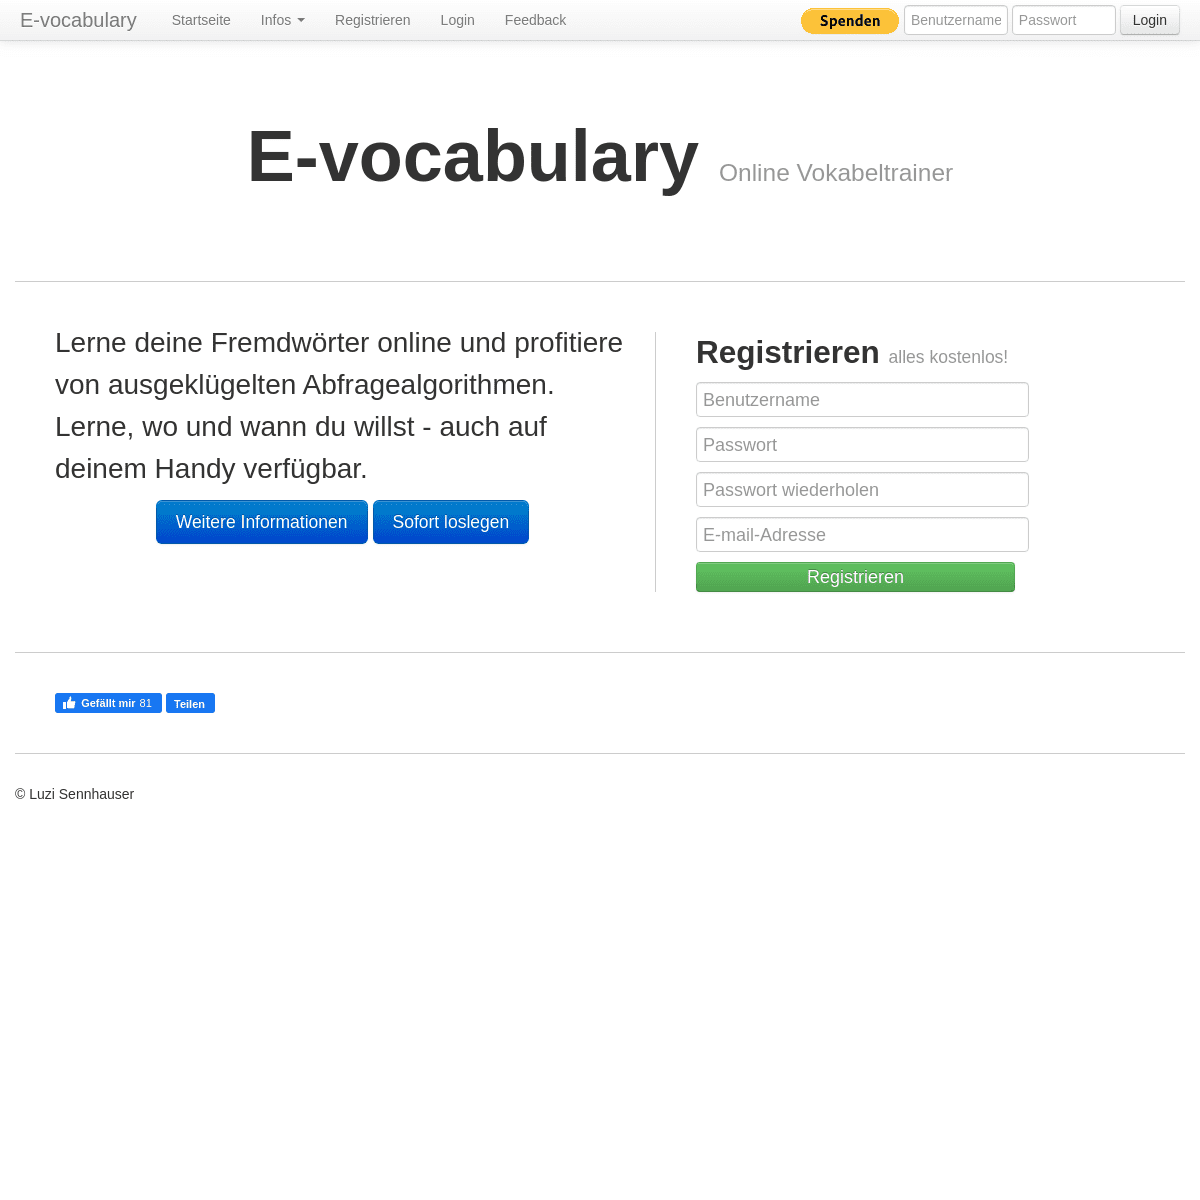 A complete backup of e-vocabulary.ch